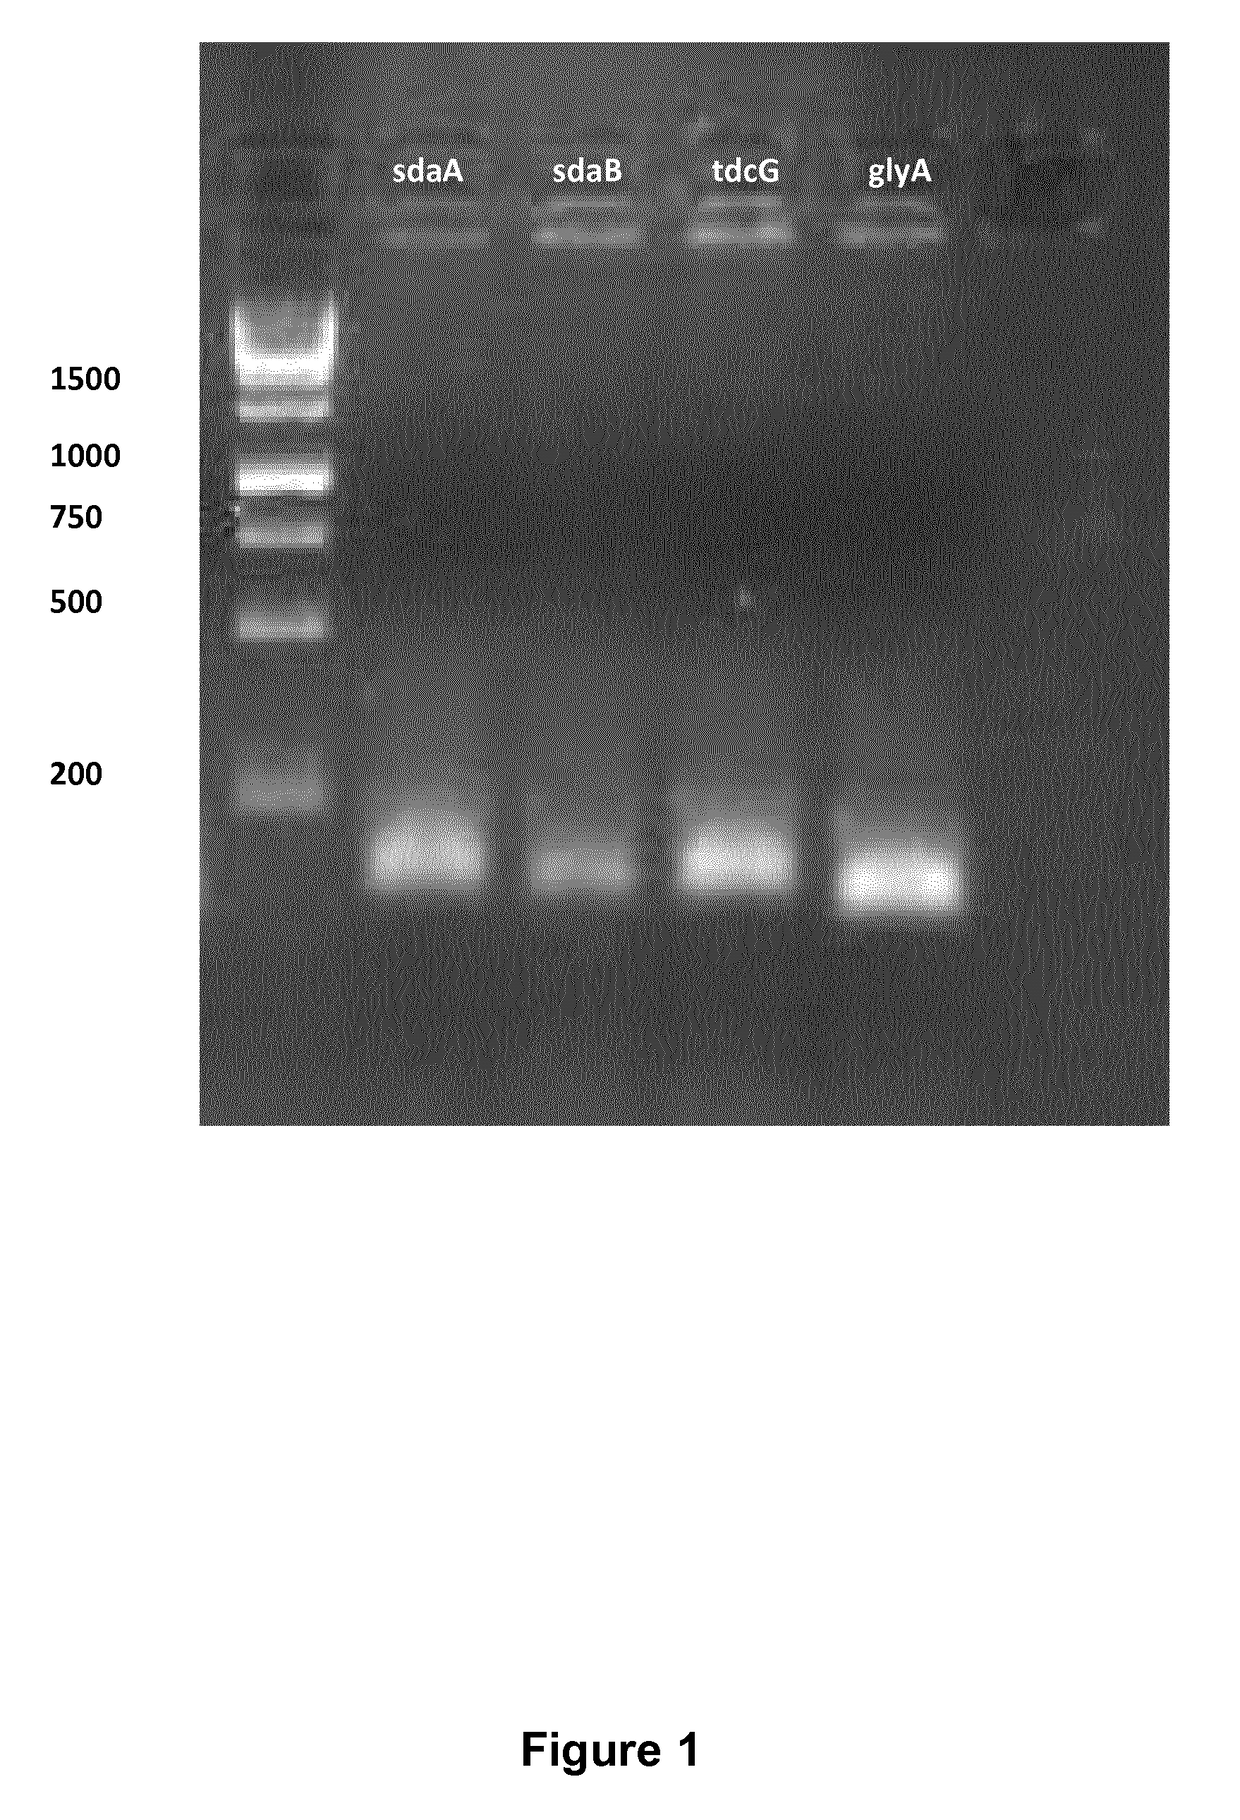 Method for the production of l-serine using genetically engineered microorganisms deficient in serine degradation pathways